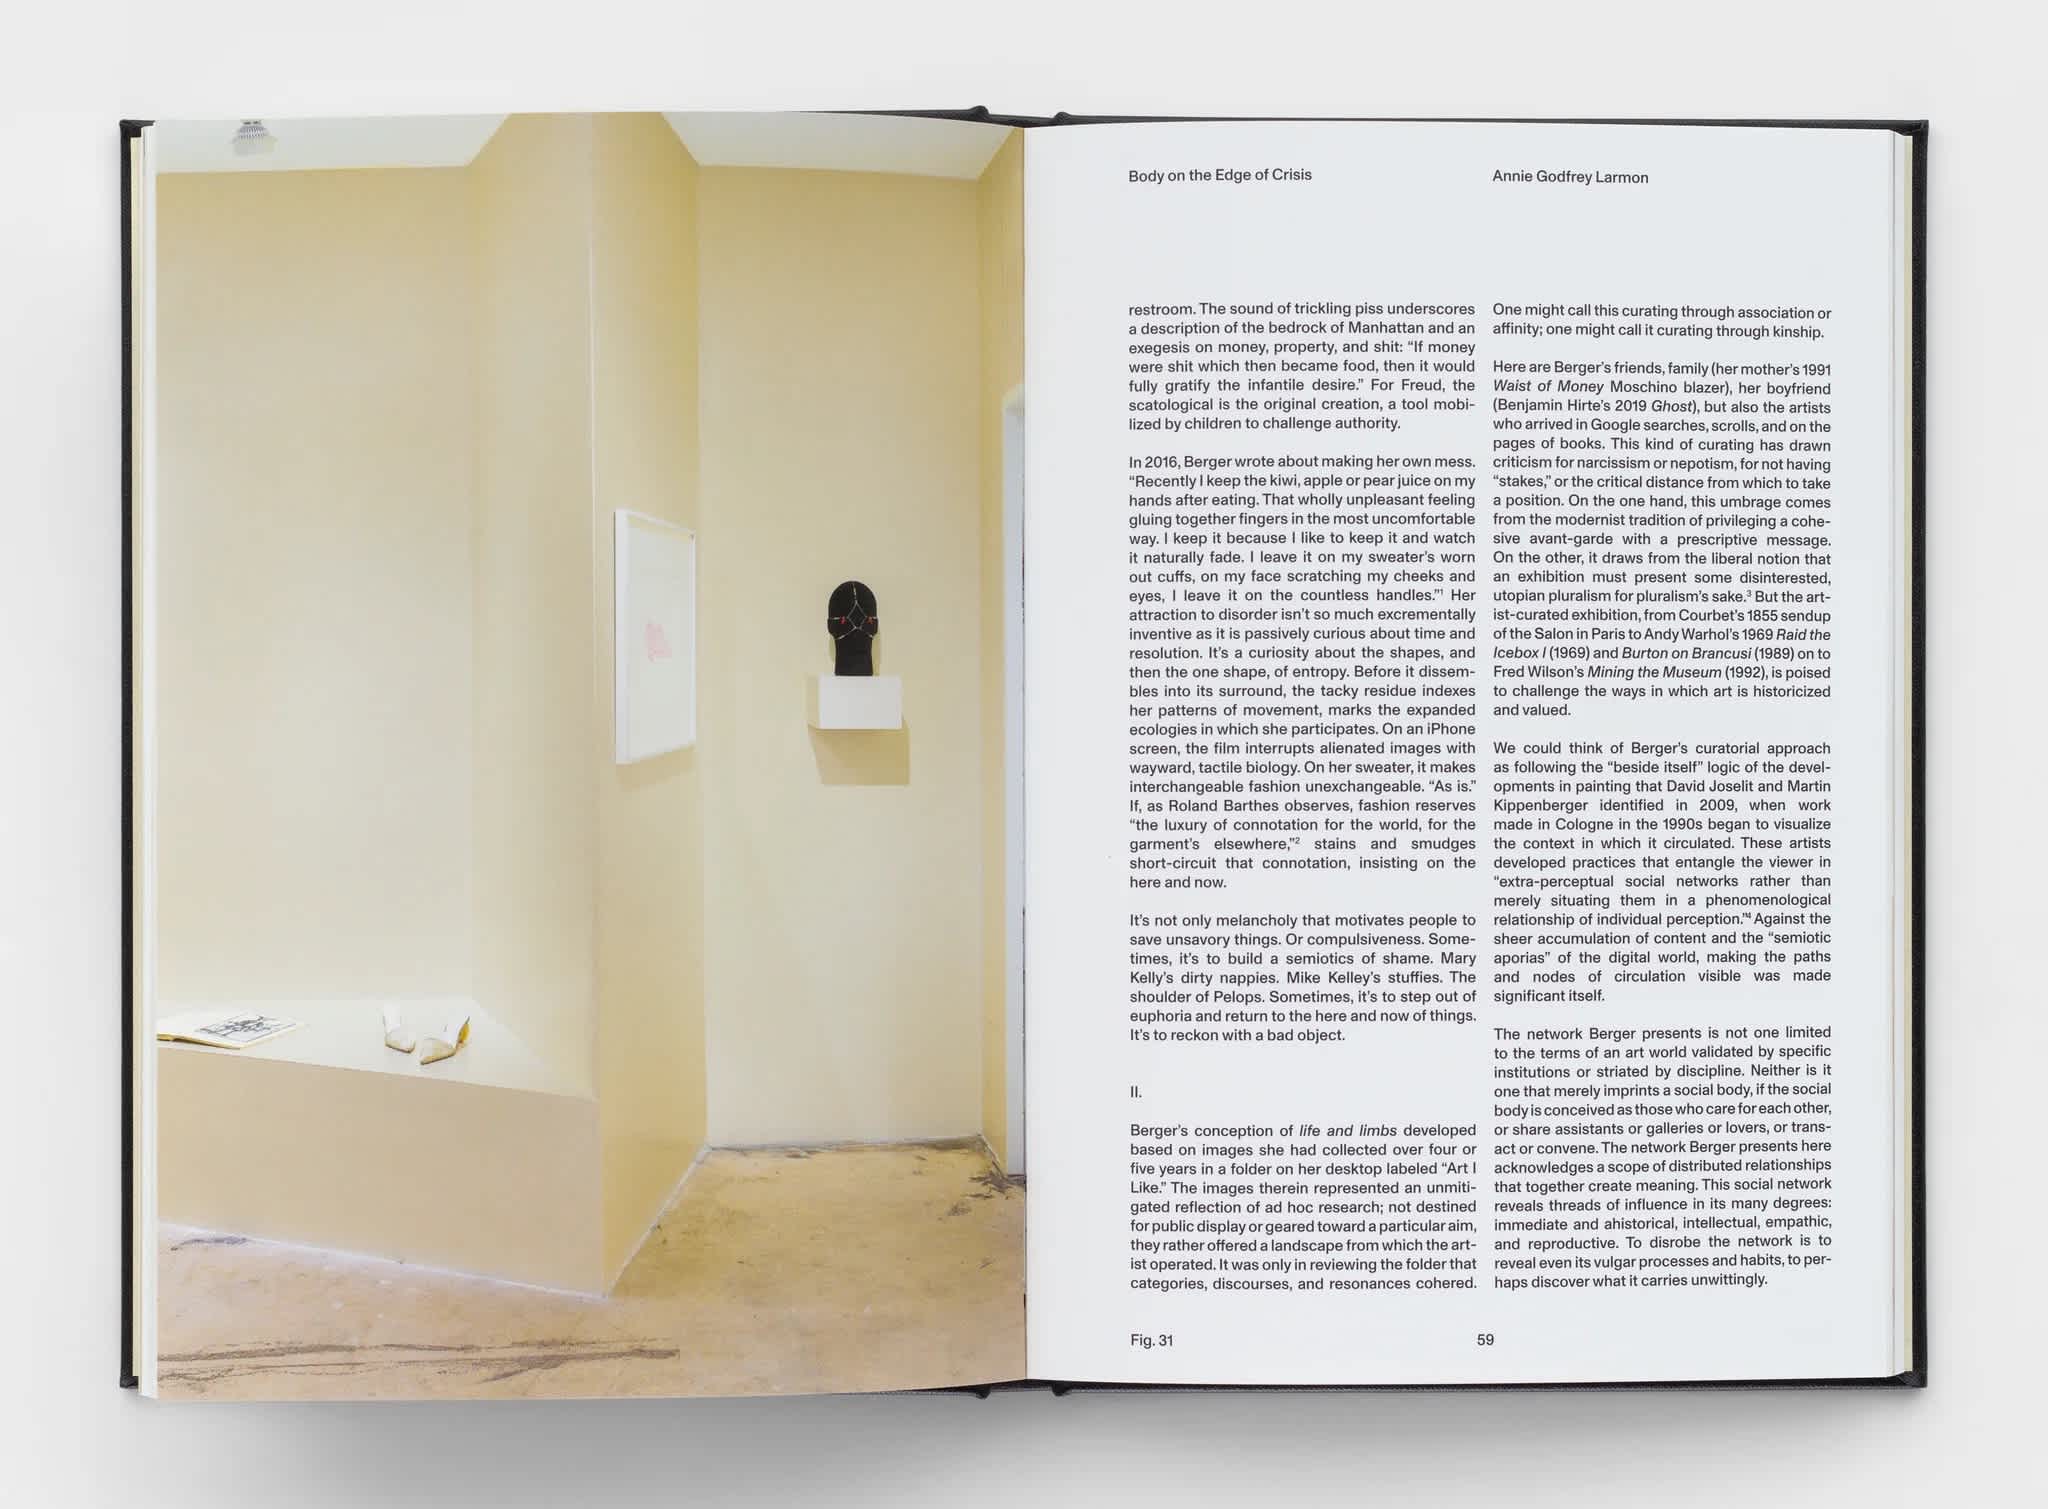 Open book with an exhibition image on the left page. Two columns of text are on the right page.